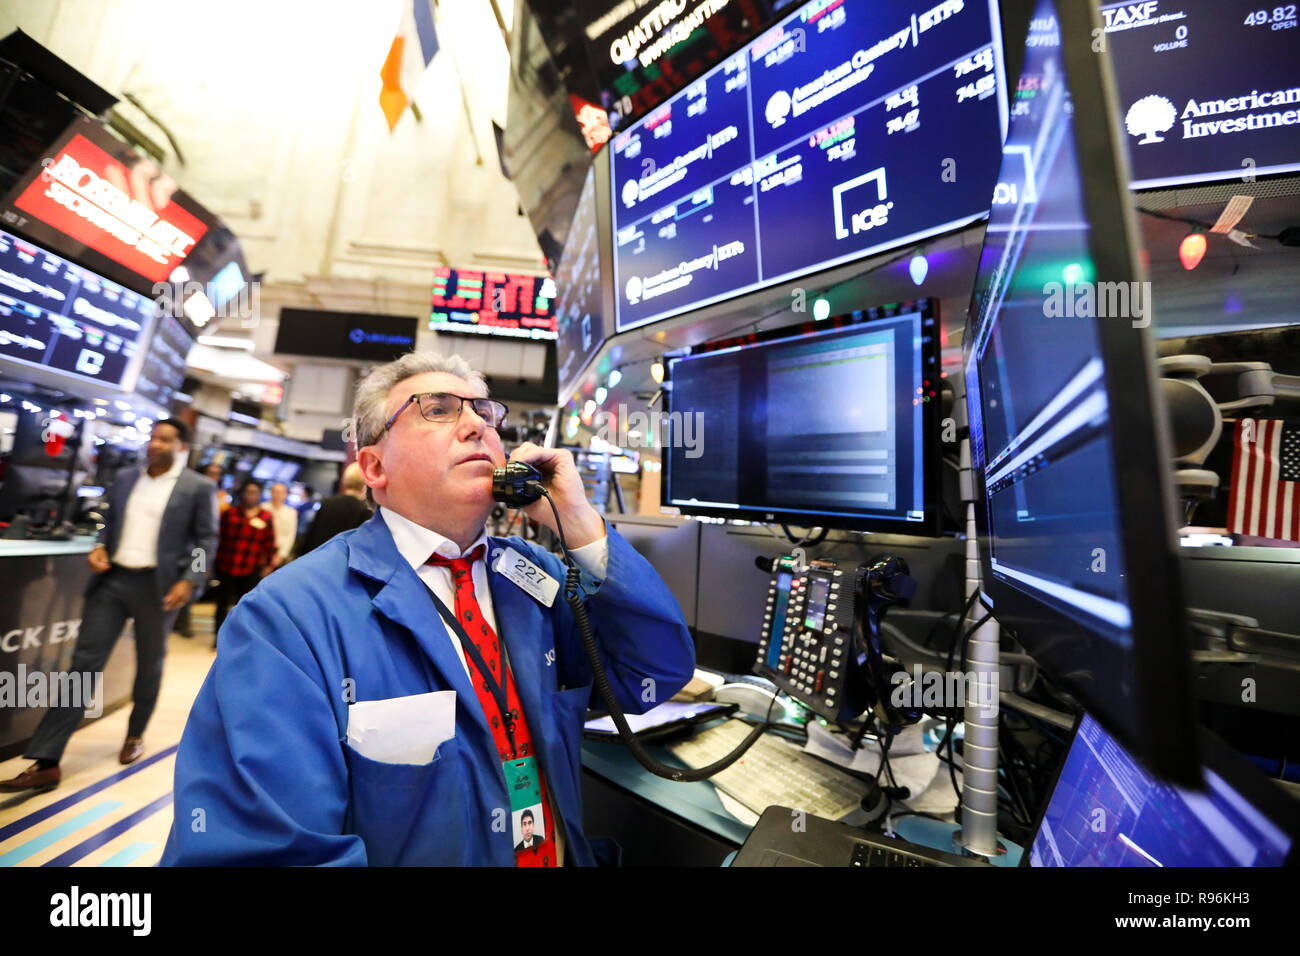 New York, USA. 19th Dec, 2018. A trader works at the New York Stock Exchange in New York, the United States, on Dec. 19, 2018. U.S. stocks ended lower on Wednesday. The Dow fell 1.49 percent to 23,323.66, and the S&P 500 decreased 1.54 percent to 2,506.96, while the Nasdaq was down 2.17 percent to 6,636.83. Credit: Wang Ying/Xinhua/Alamy Live News Stock Photo